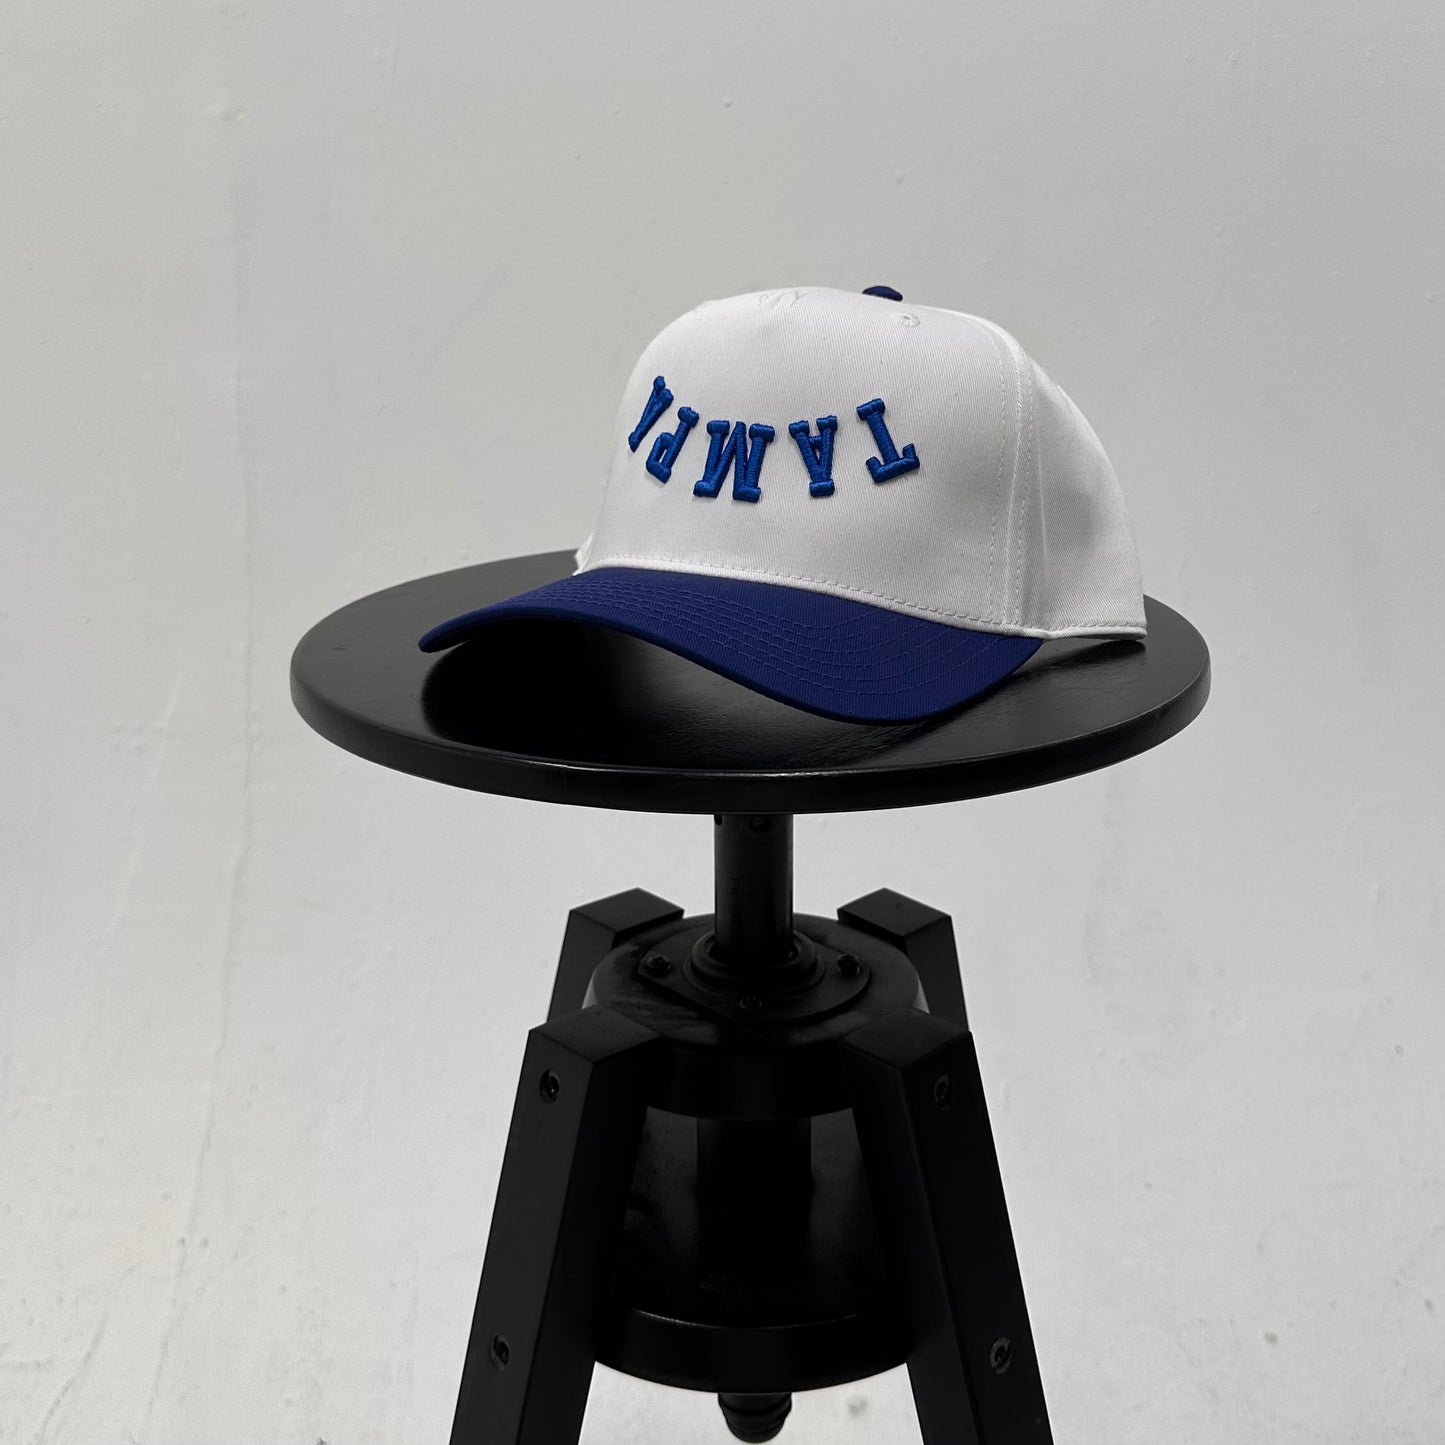 The Tampa Hat - White/Royal Blue